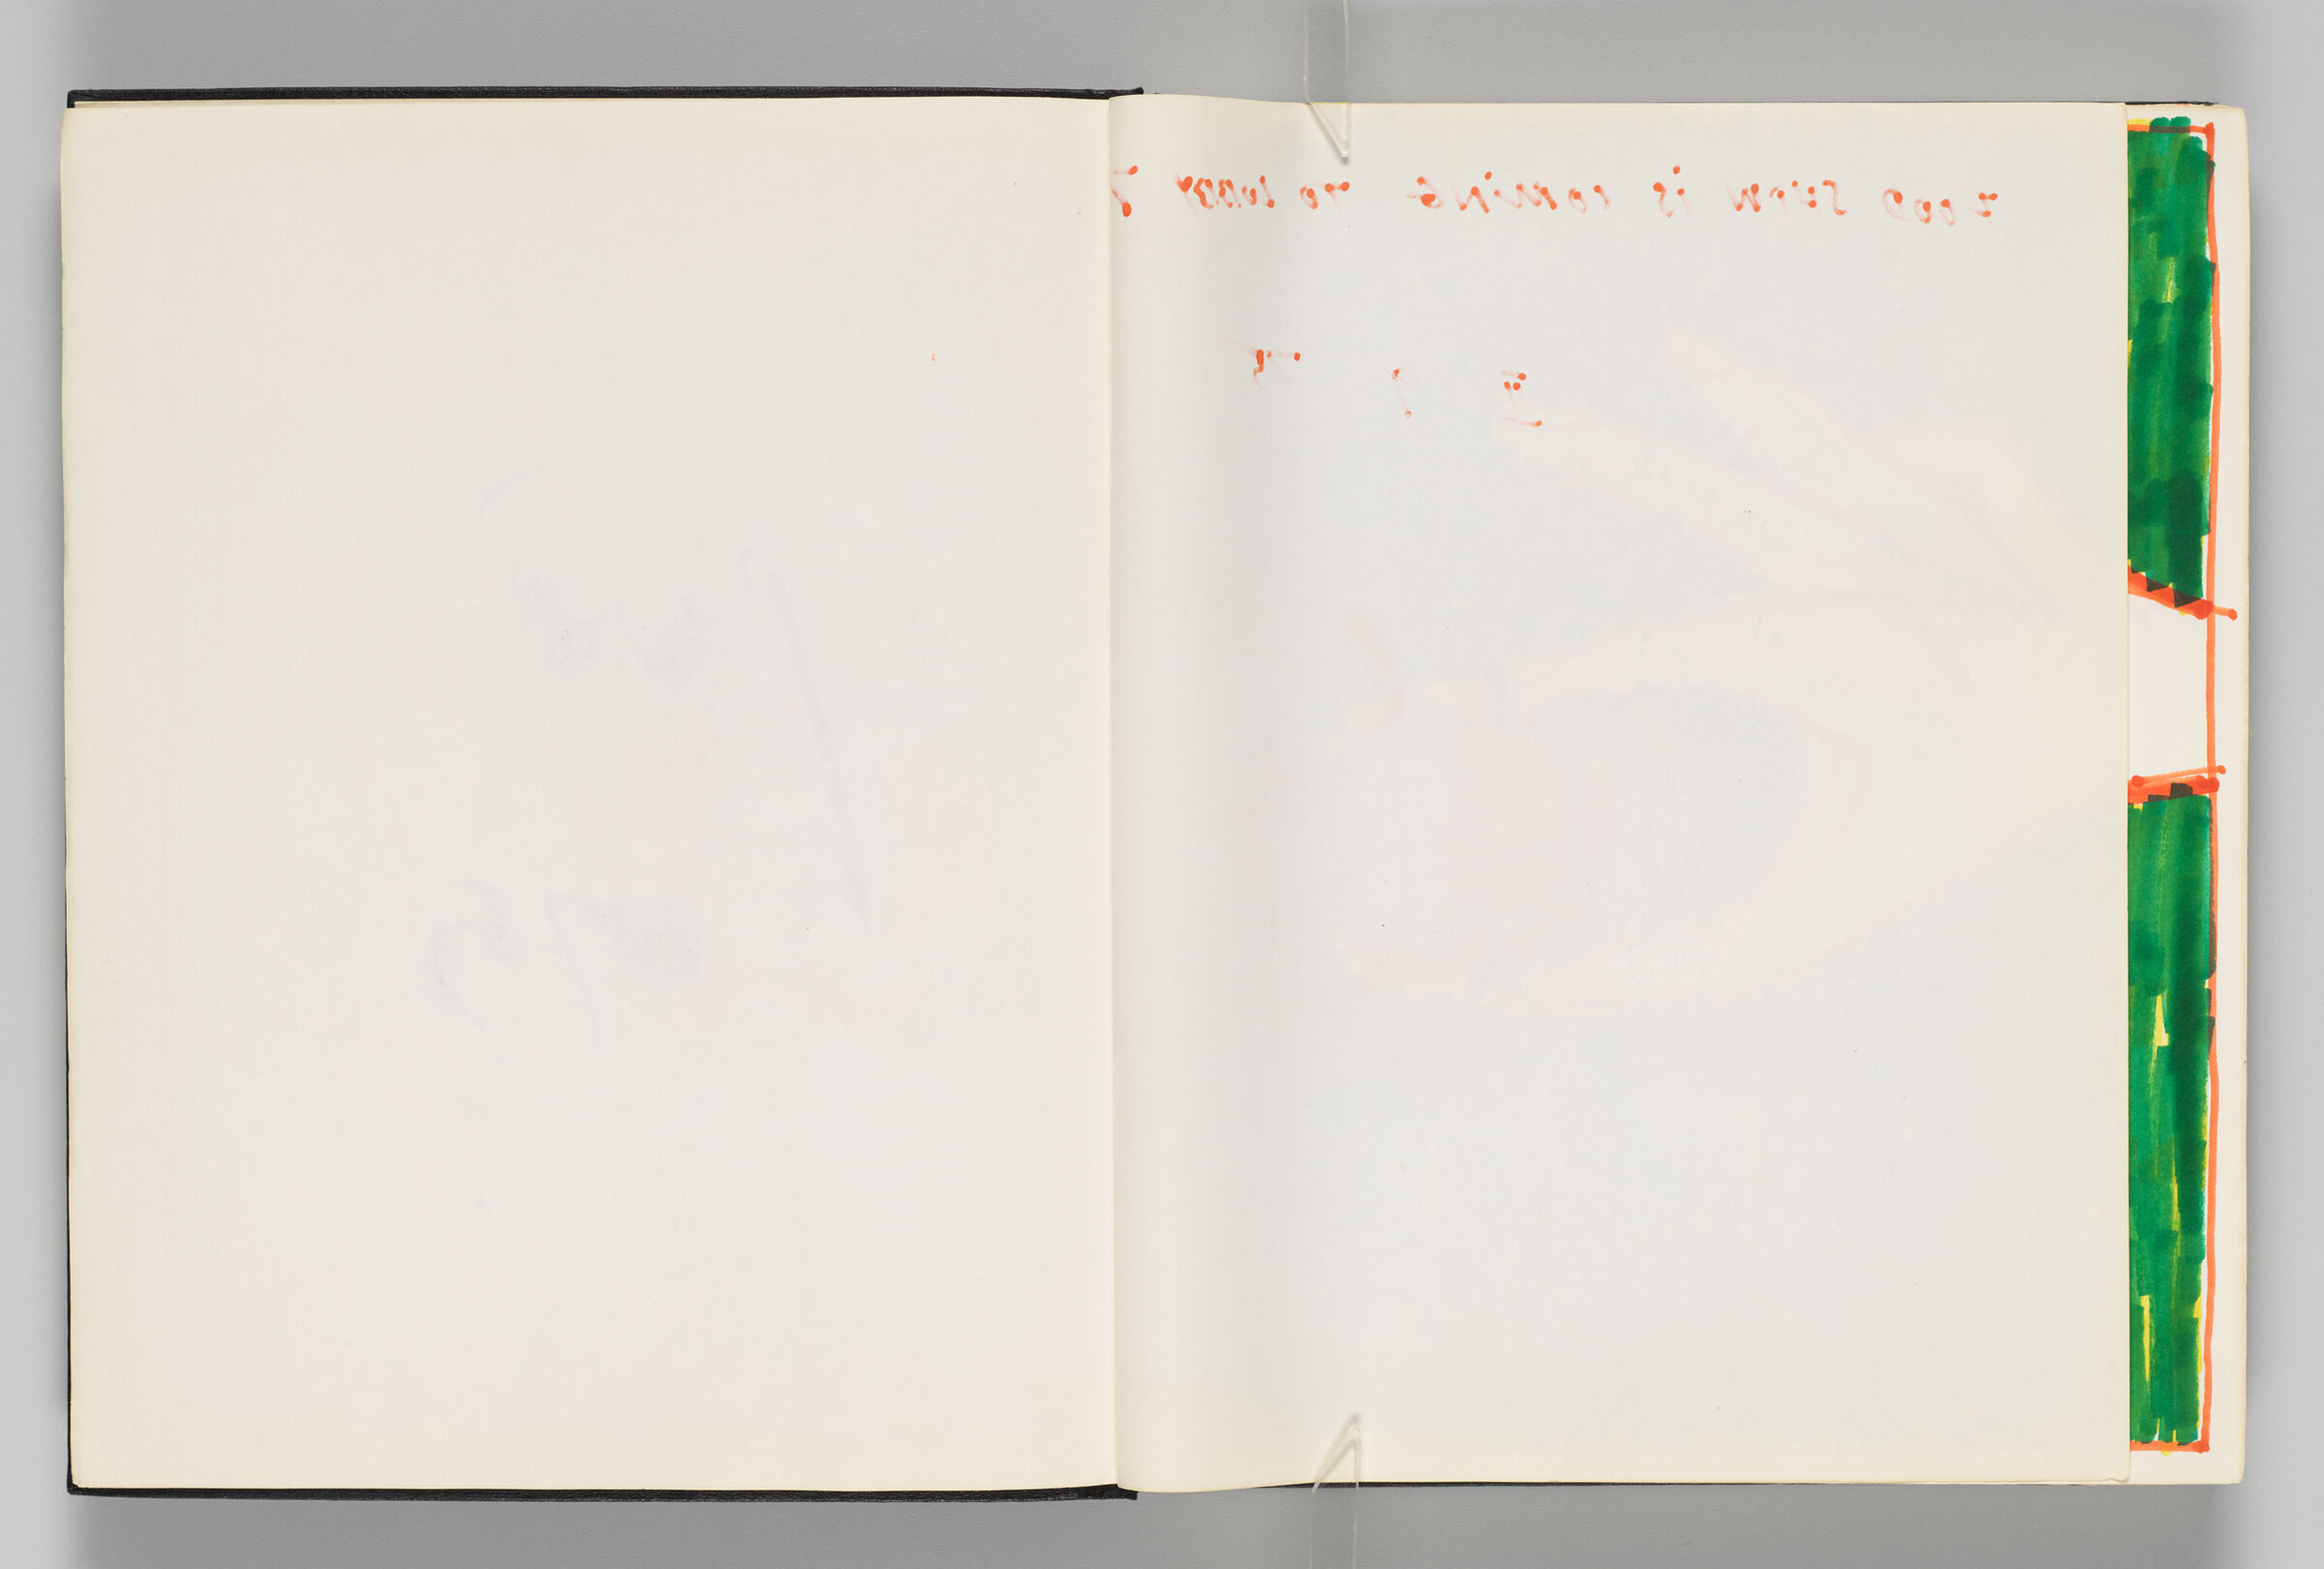 Untitled (Blank, Left Page); Untitled (Bleed-Through Of Following Page, Right Page)